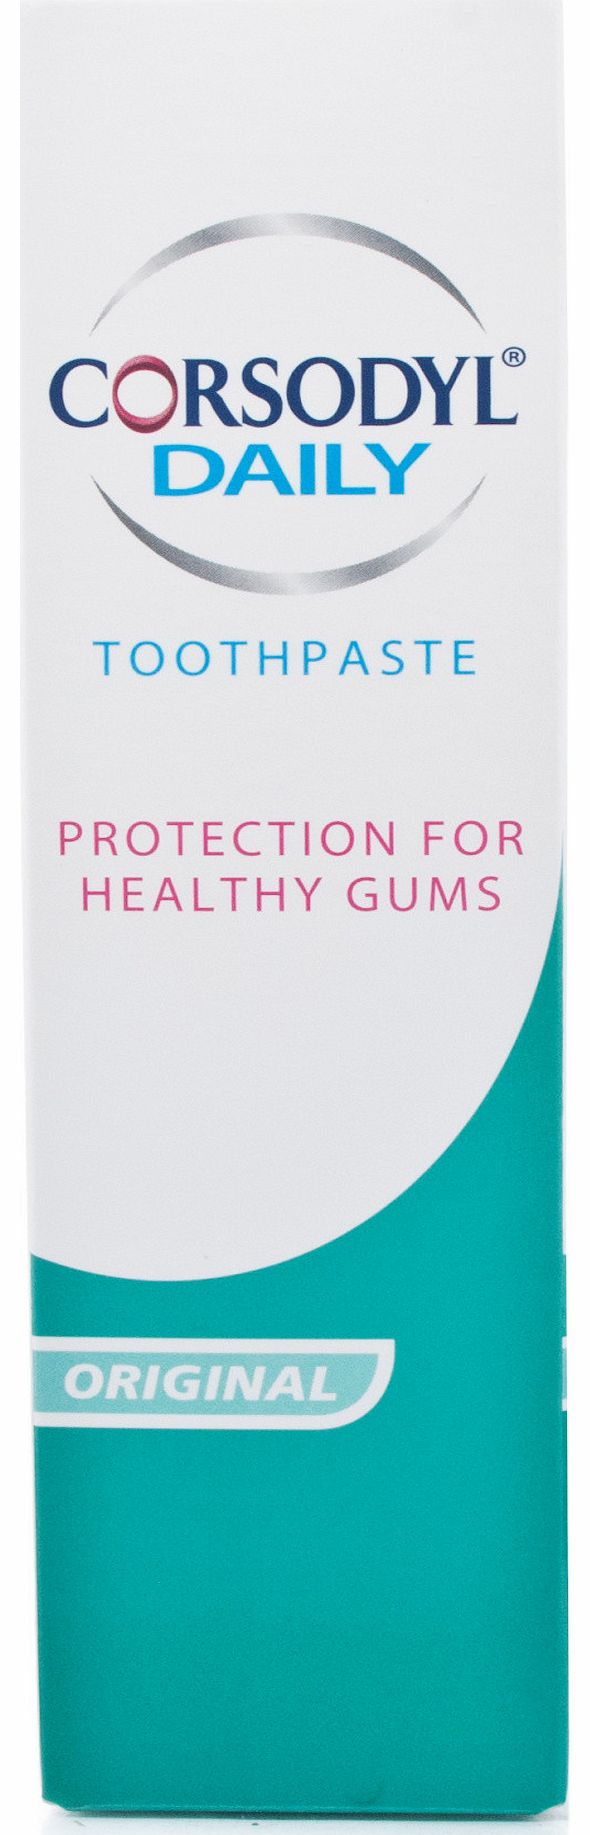 Daily Gum & Tooth Paste